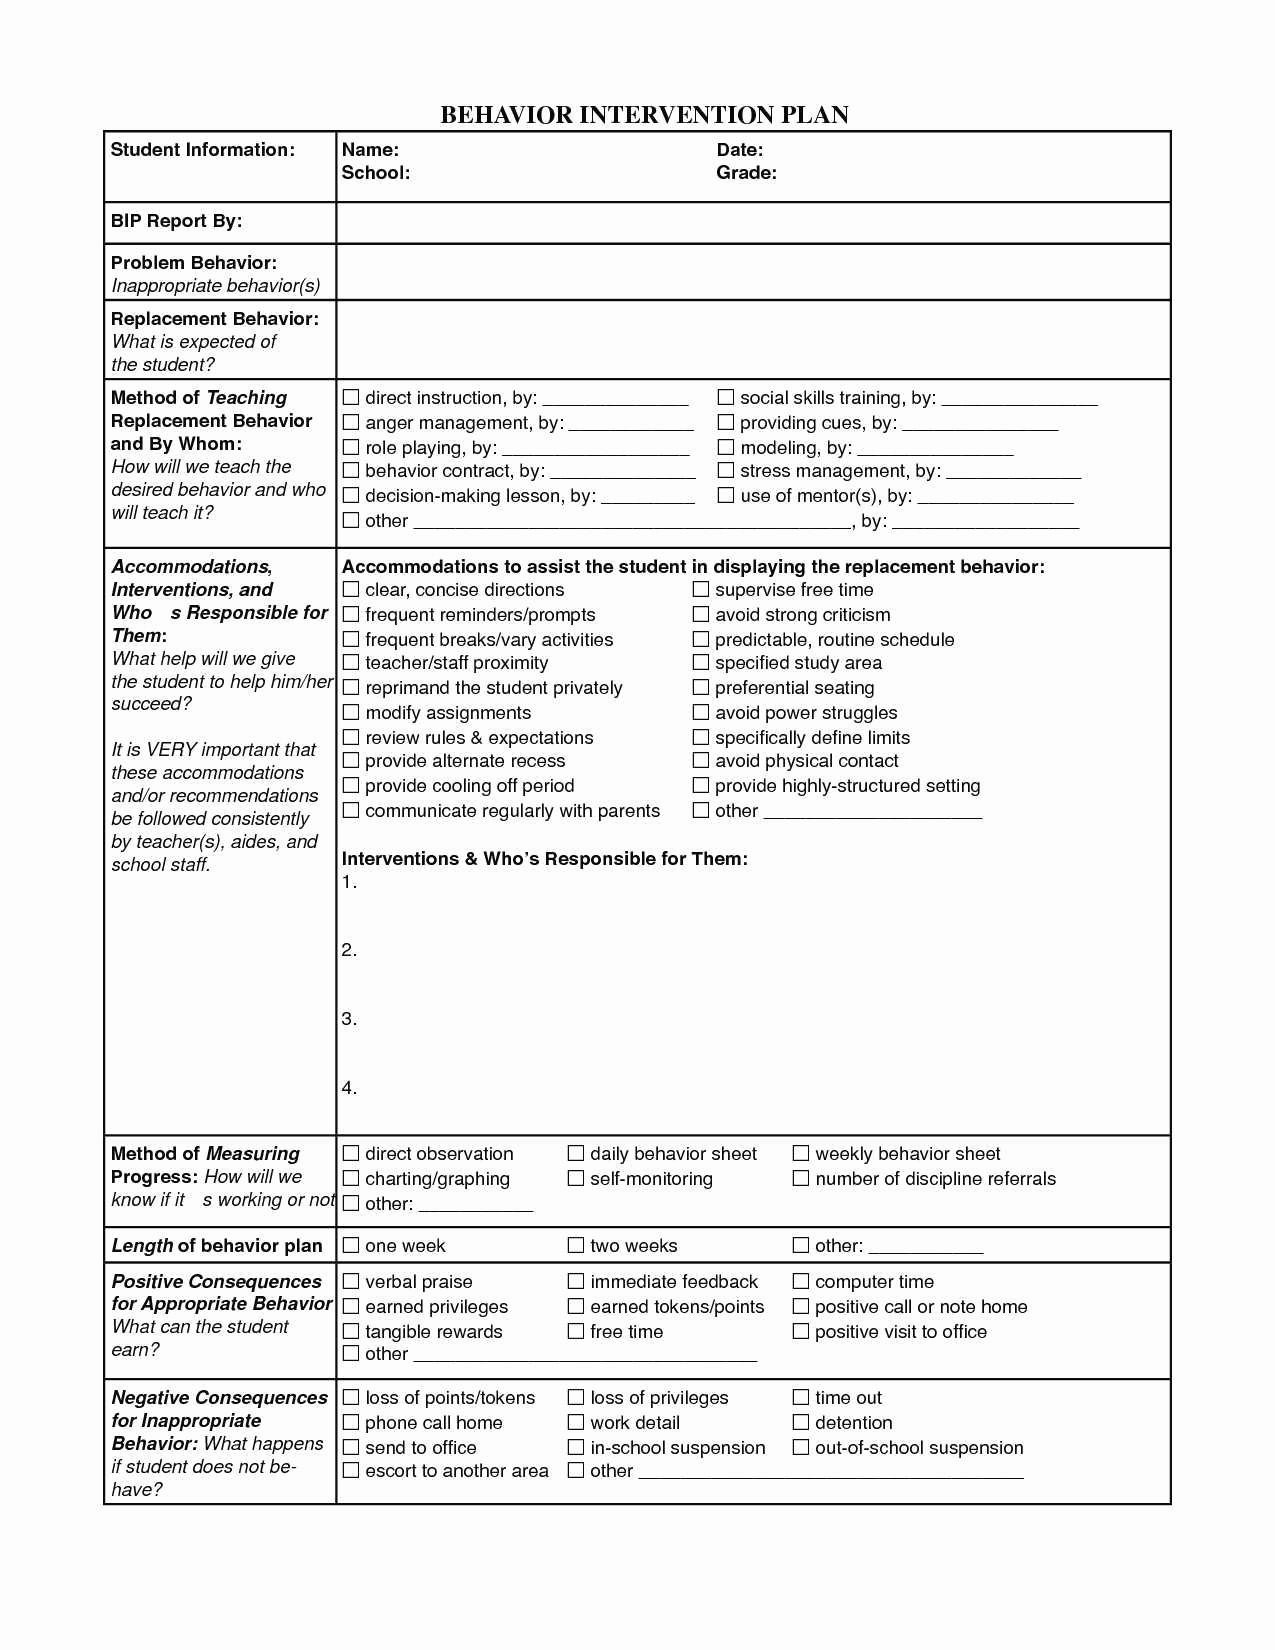 Mental Health Safety Plan Template Lovely Elegant Counseling Treatment Plan Template